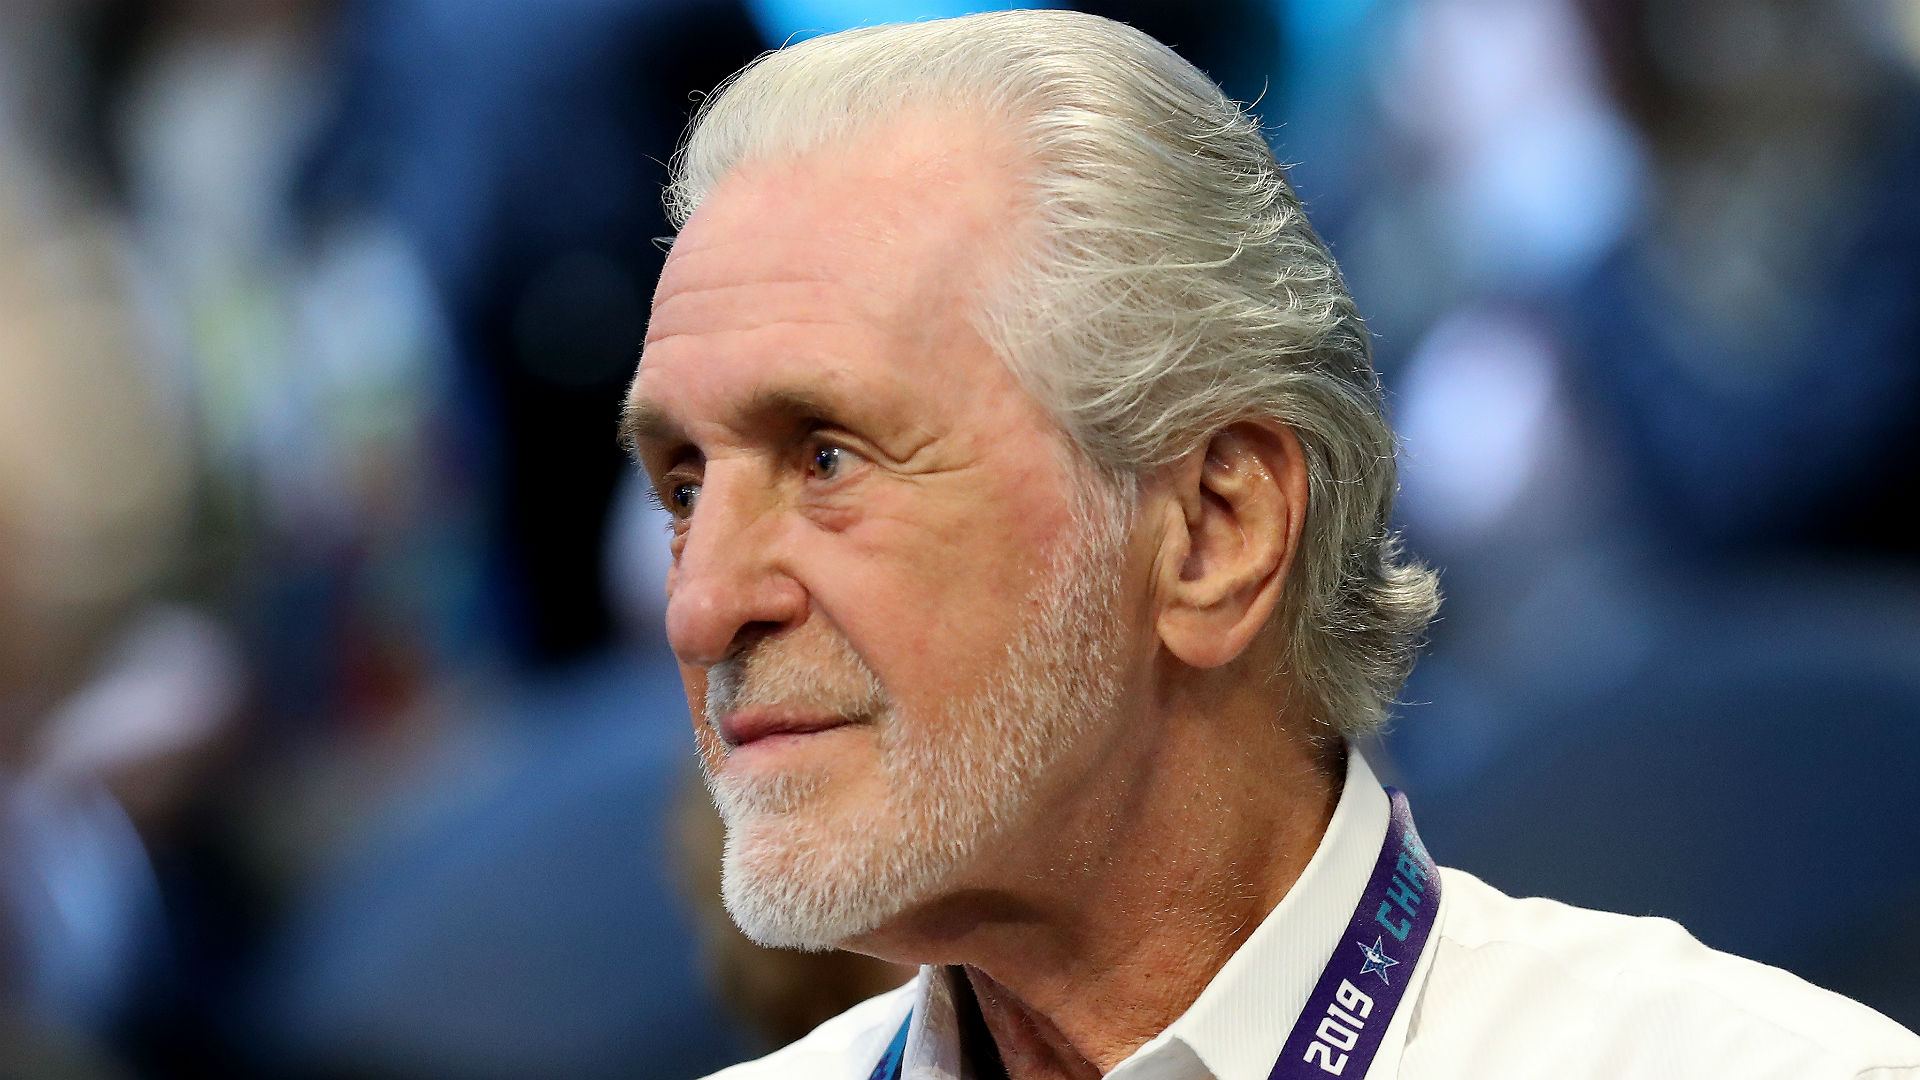 Miami Heat president Pat Riley "saw a dynasty fly out the window" when LeBron James left the NBA team.